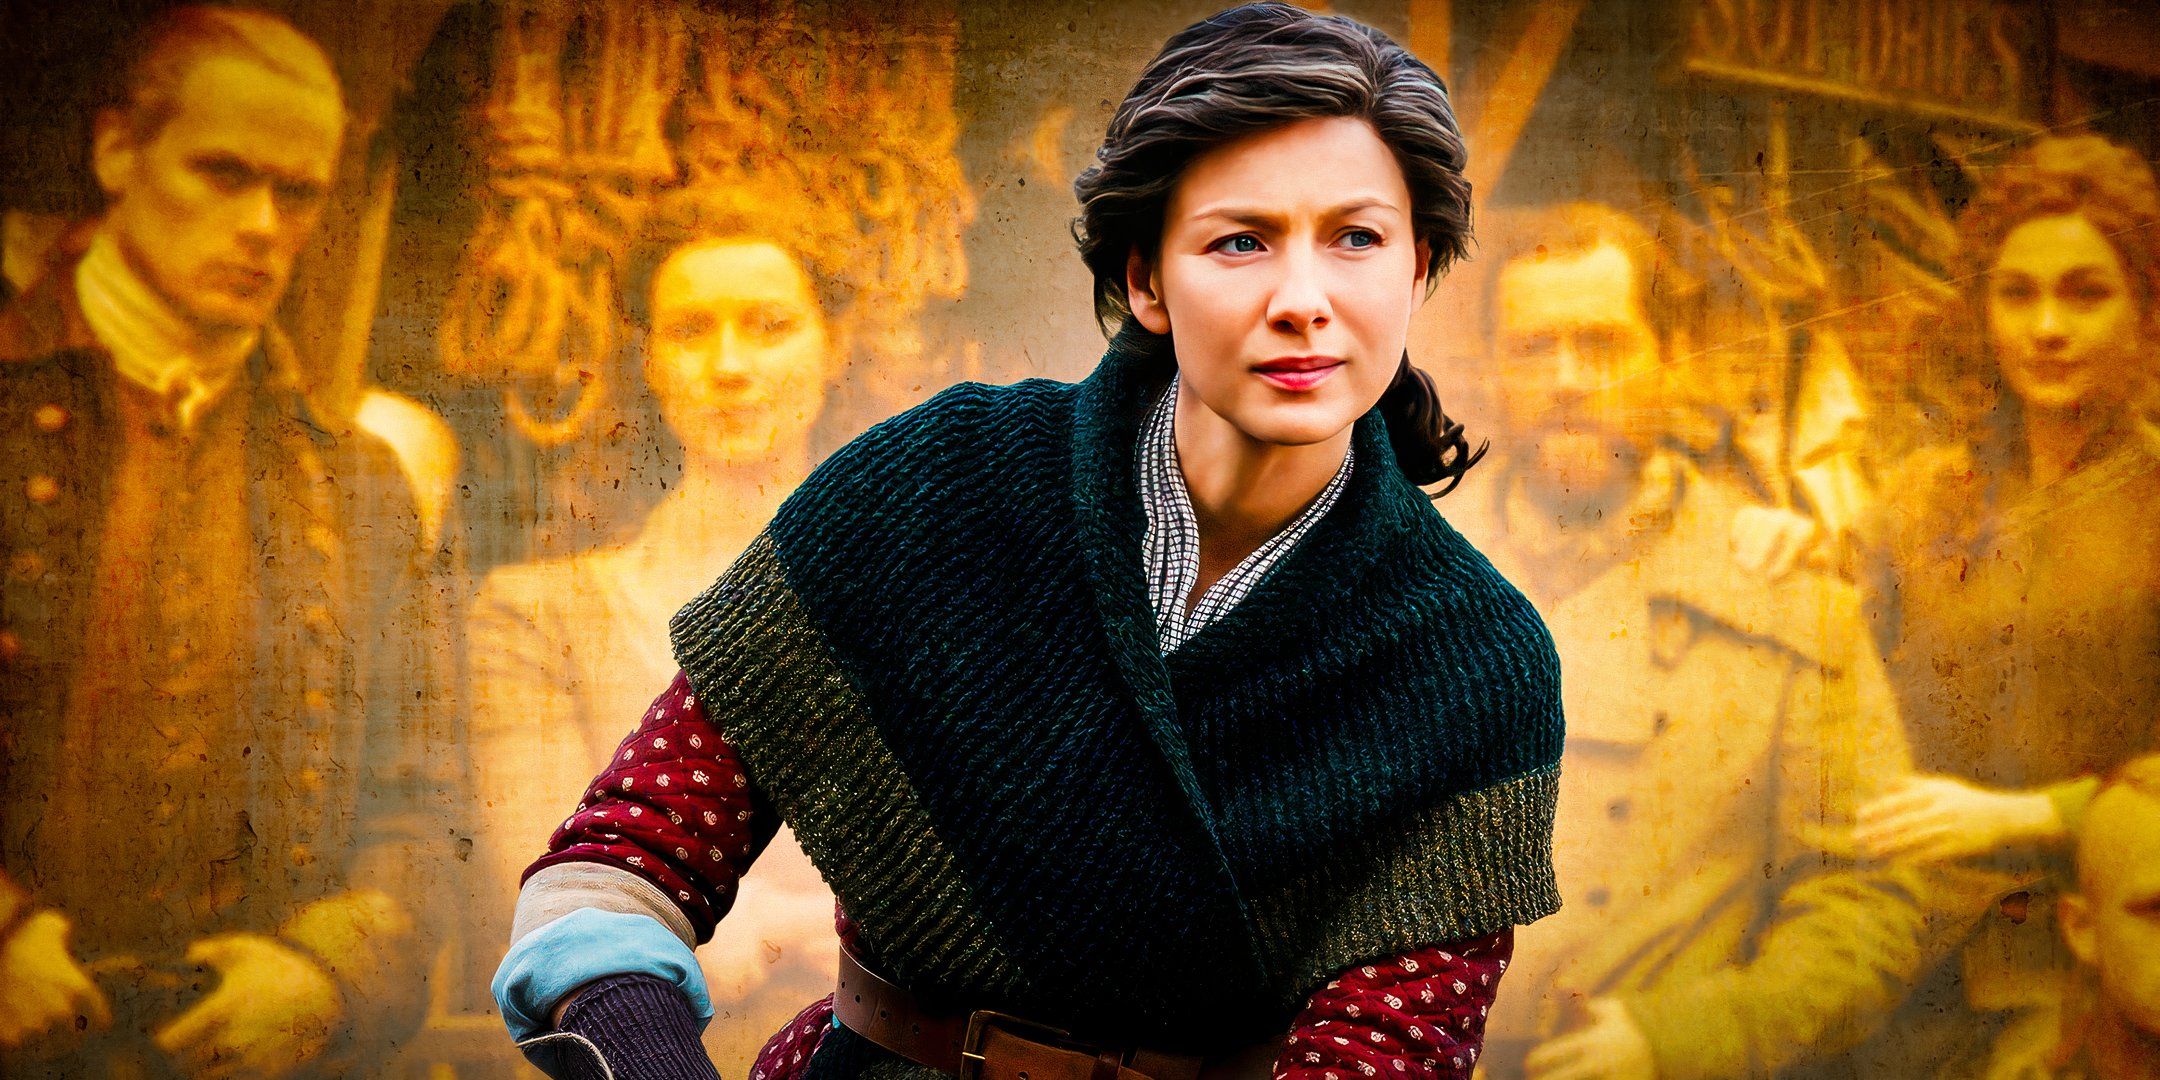 Caitríona Balfe as Claire looking serious in Outlander with imagery of the show's cast behind her